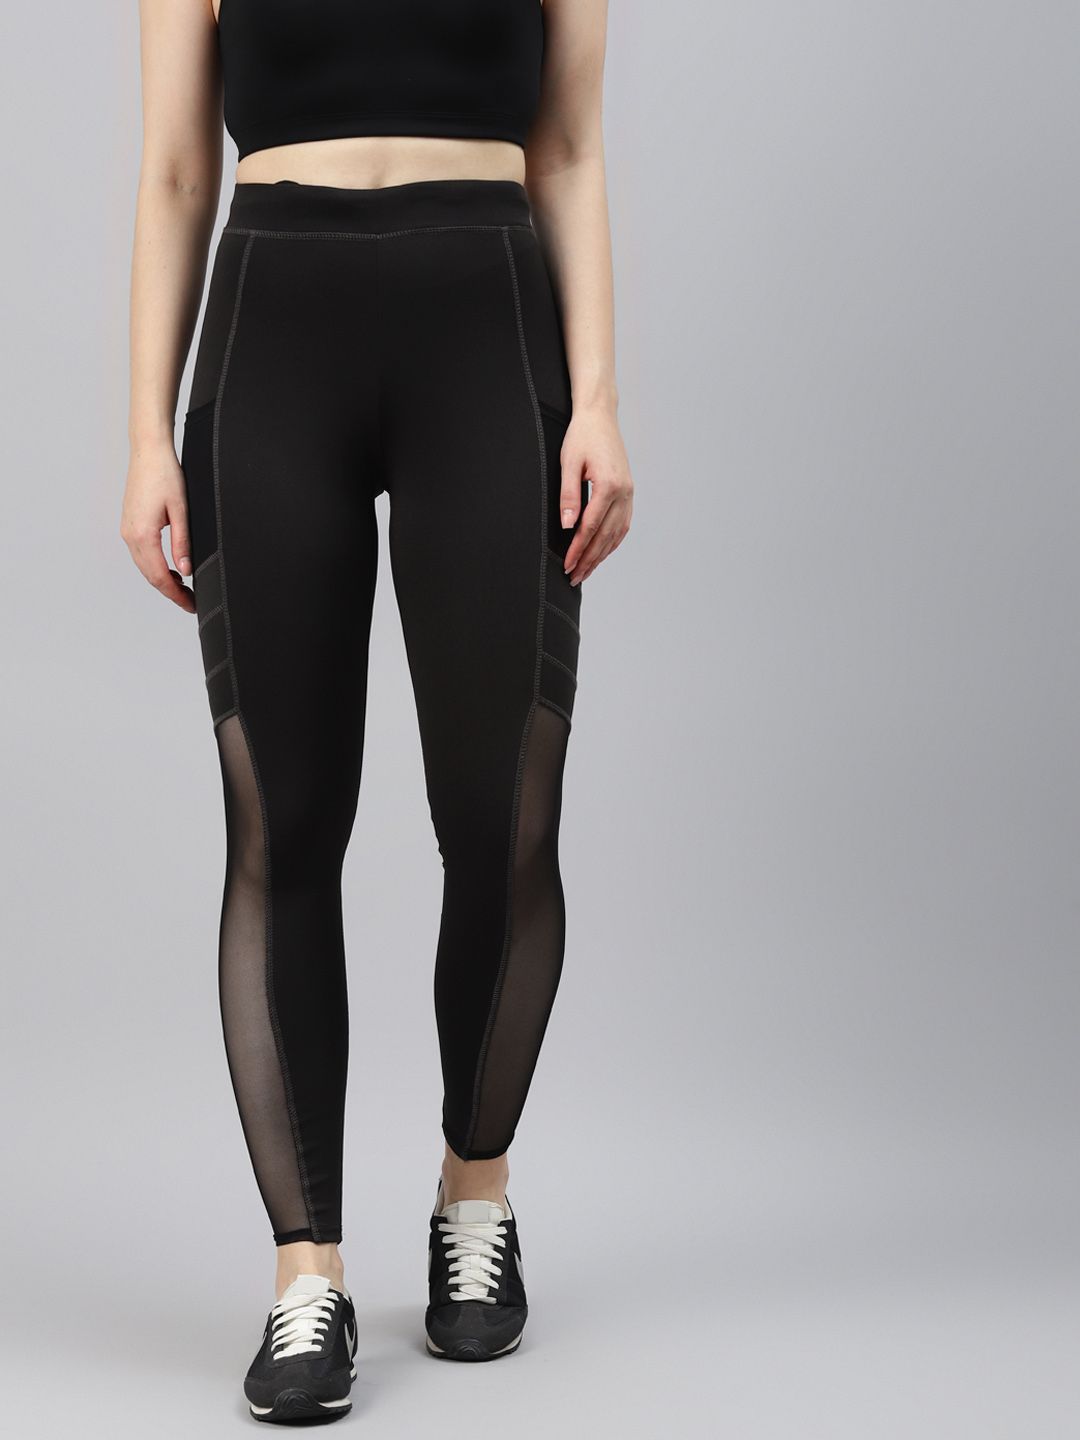 Blinkin Women Black Solid Mesh Paneled Gym Tights Price in India